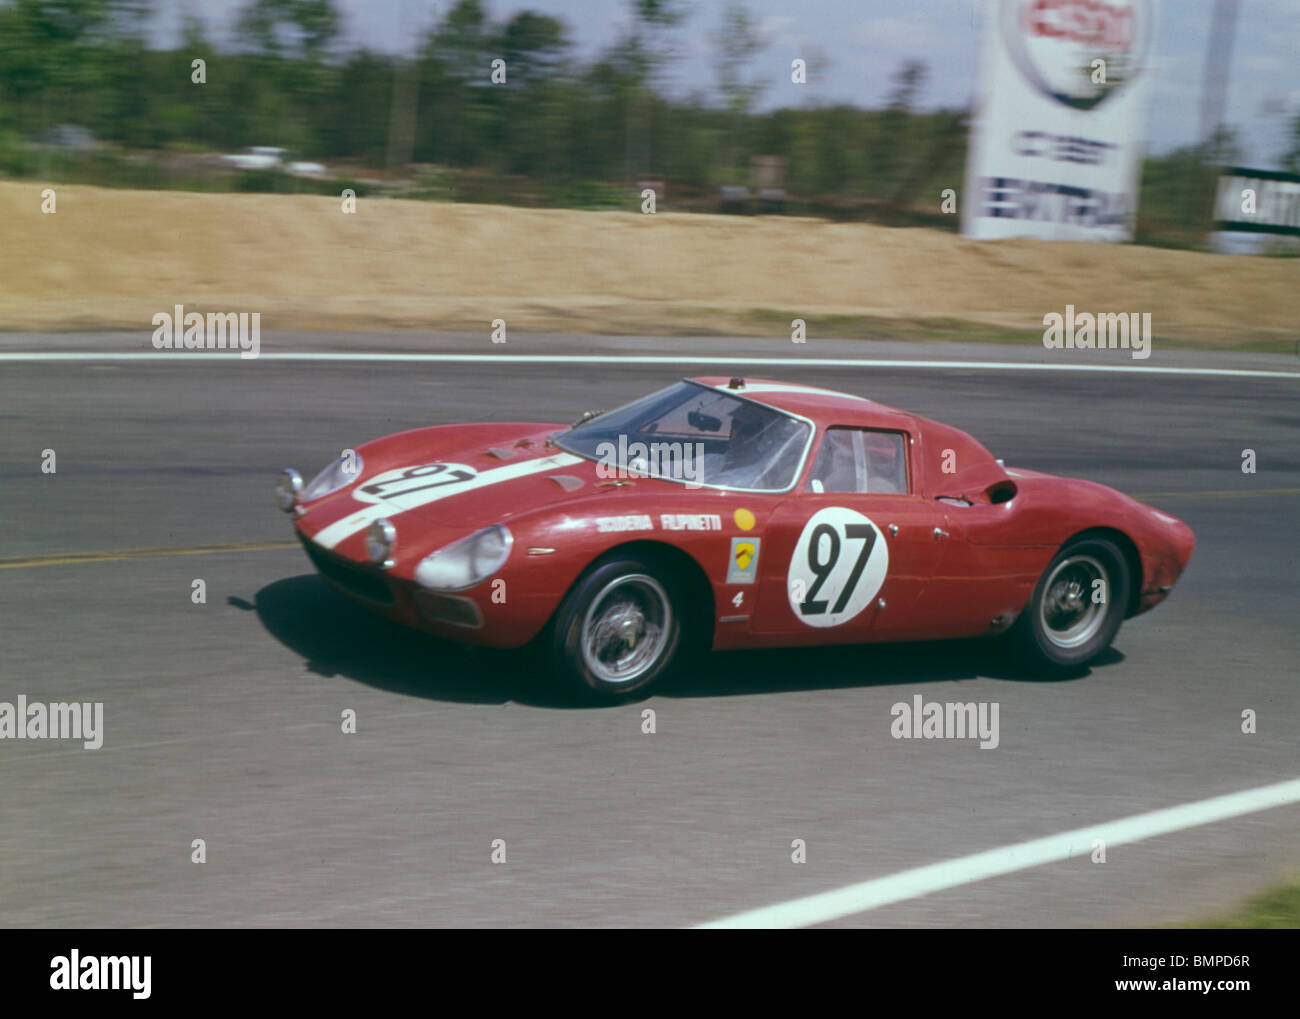 Ferrari 275 LM of Dieter Spoerry and Armand Boller, who finished 7th in the 1965 Le Mans 24 hour race. Stock Photo